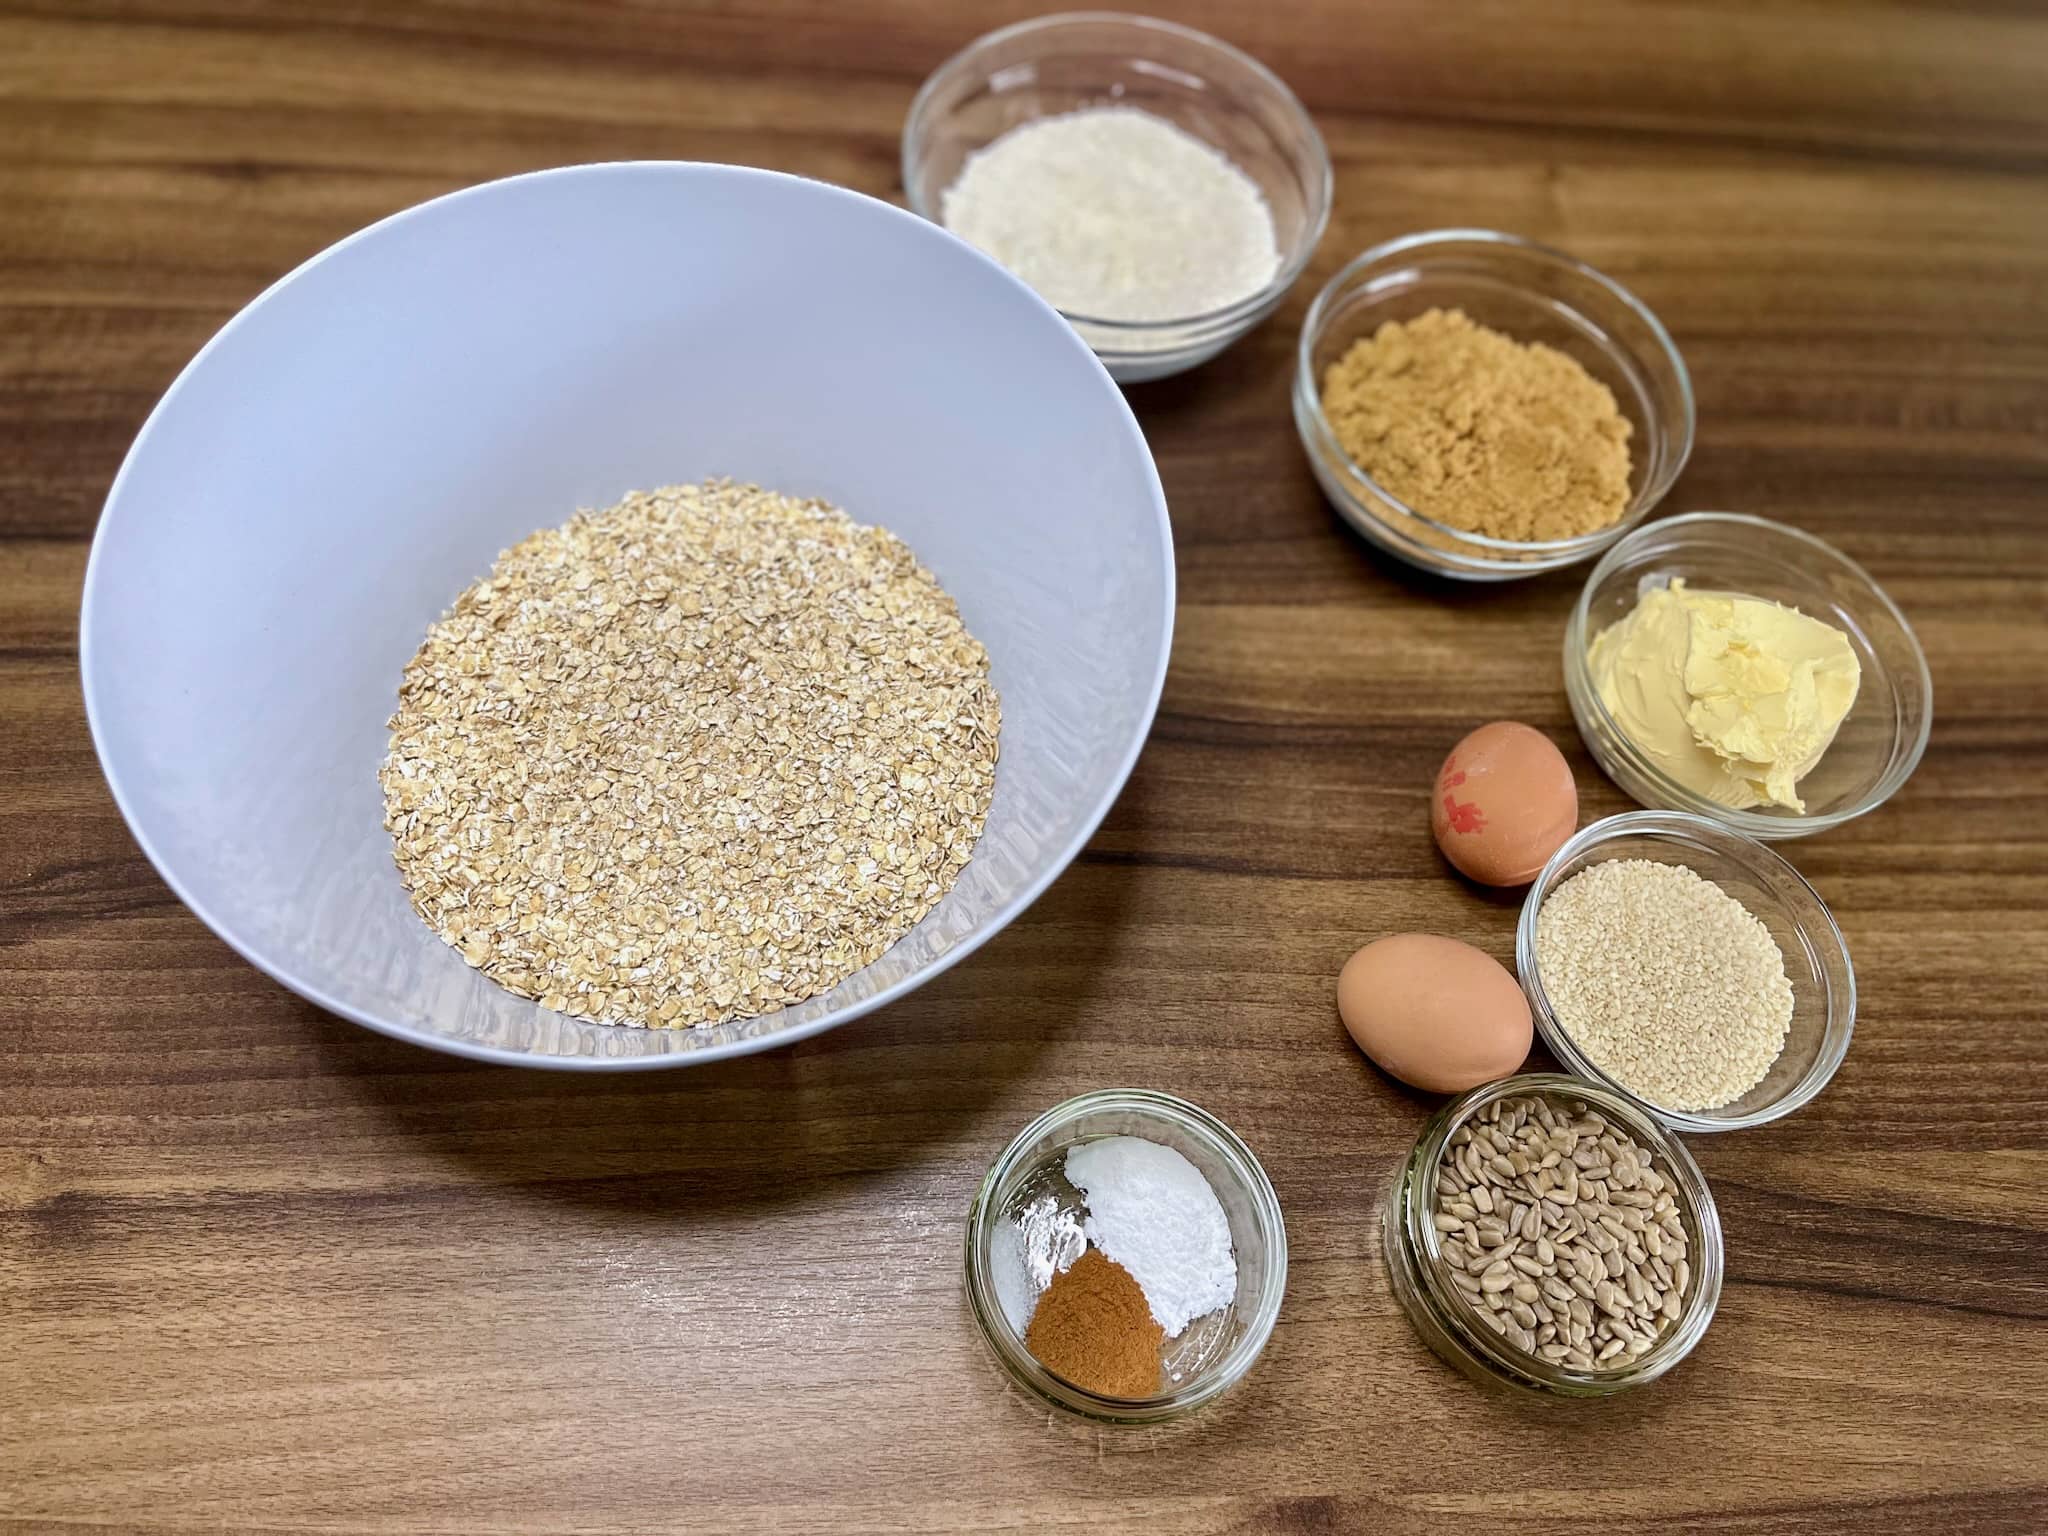 All the ingredients on the tabletop ready to make Just Perfect Seeded Oat Cookies